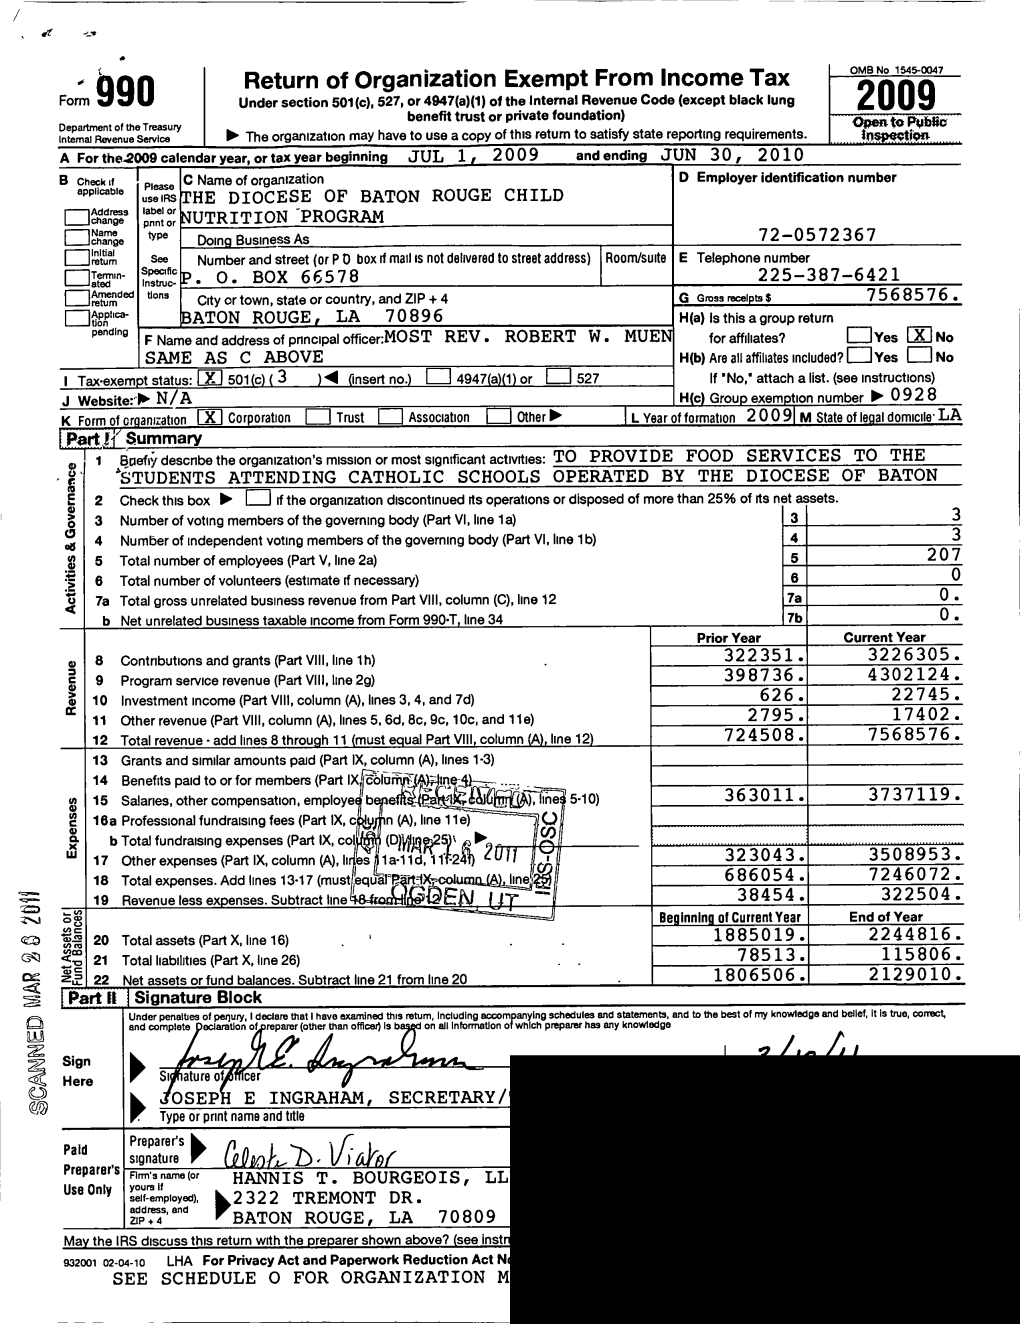 Form 990 Return of Organization Exempt from Income Tax 2009